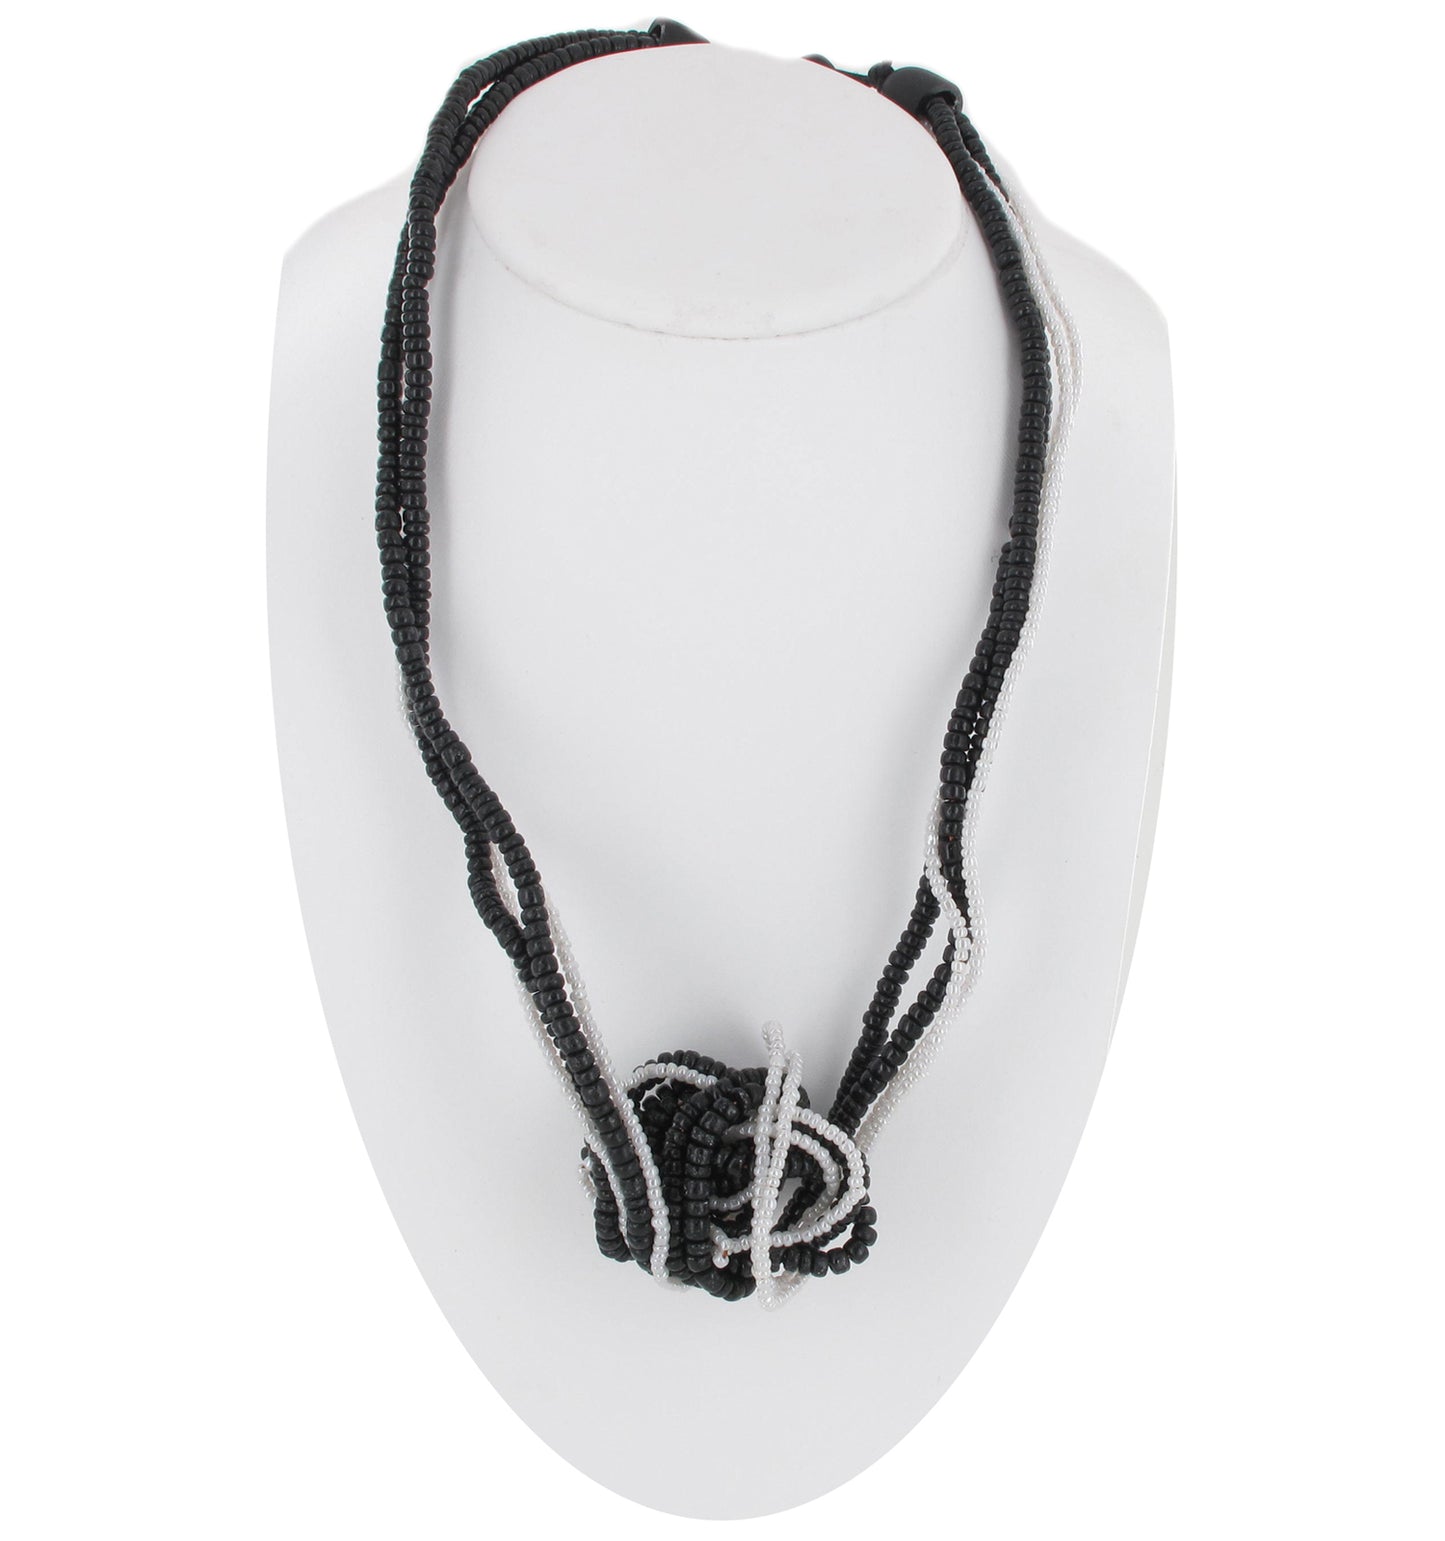 Crazy Wire Black White Wood Beaded Multistrand Statement Necklace 40"